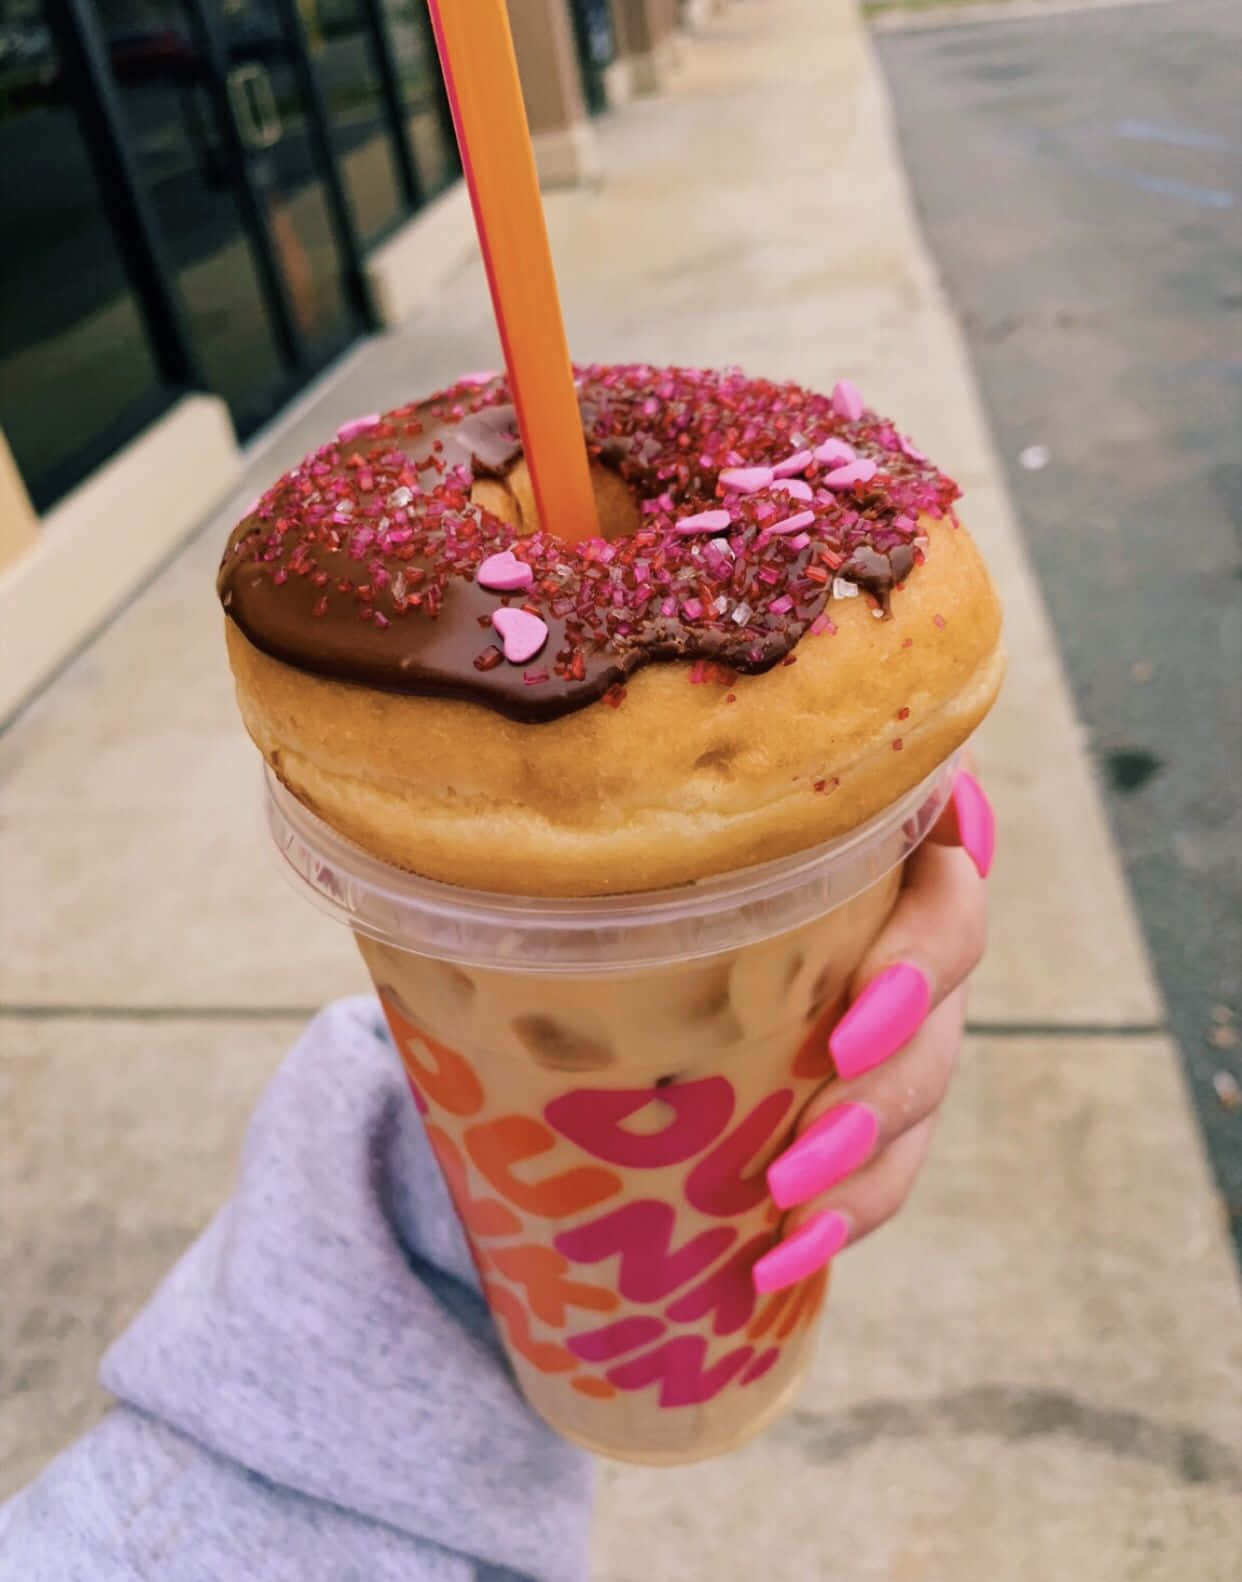 Freshly brewed coffee and delicious donuts from Dunkin Donuts